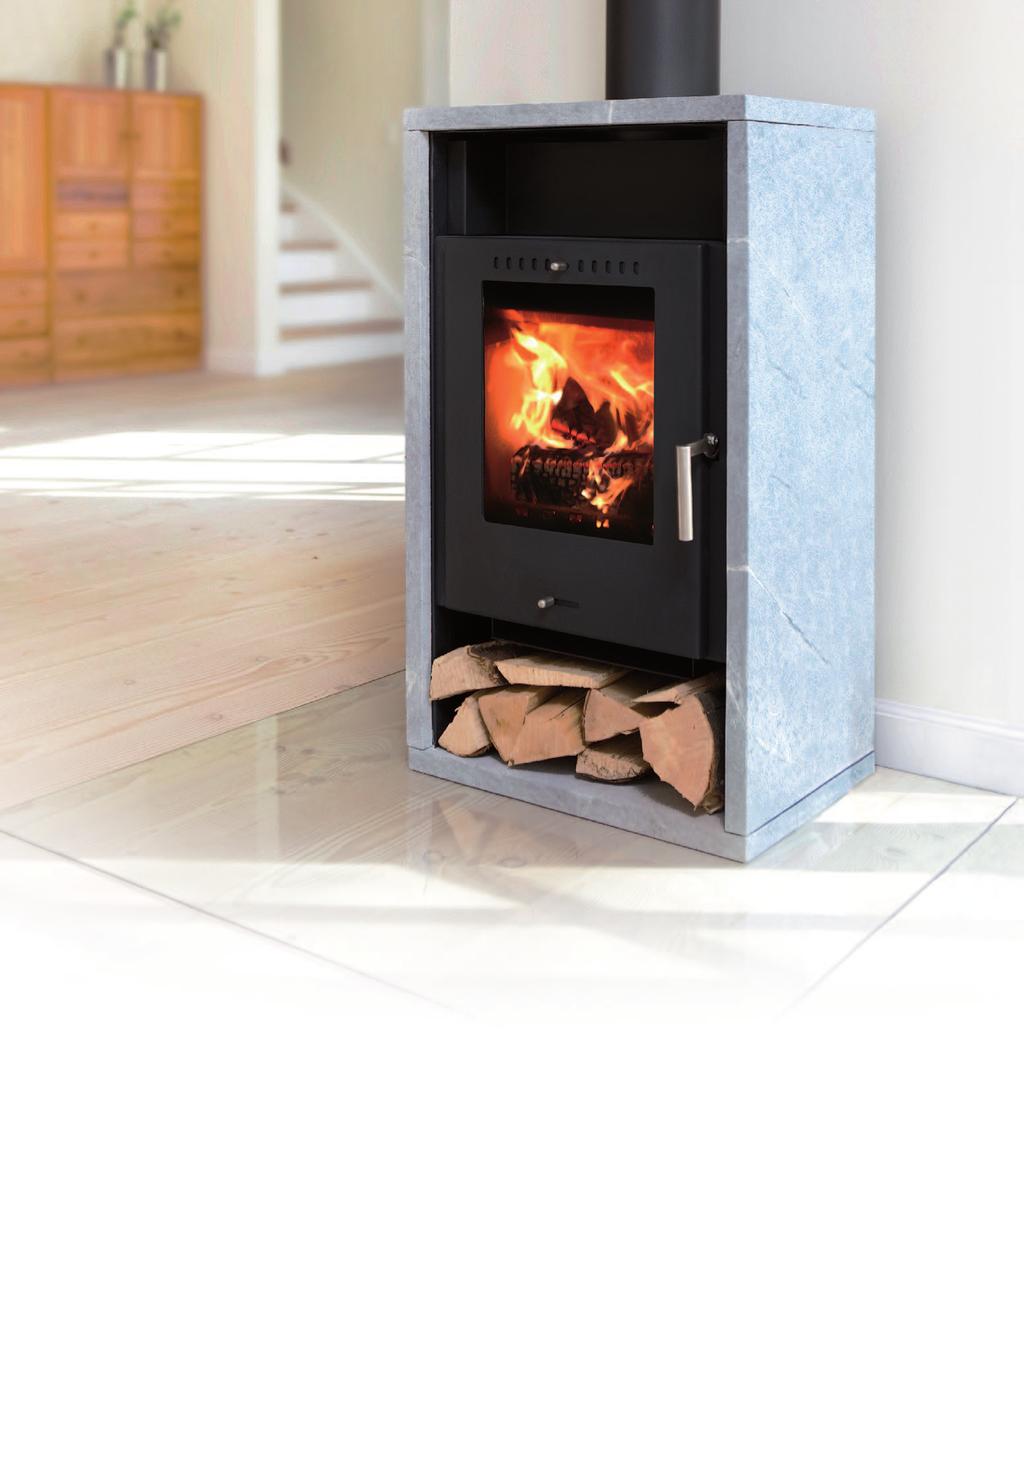 Asgård 7SK An effective and functional convection wood stove covered with decorative soapstone, which gives a beautiful contrast to the black surfaces.